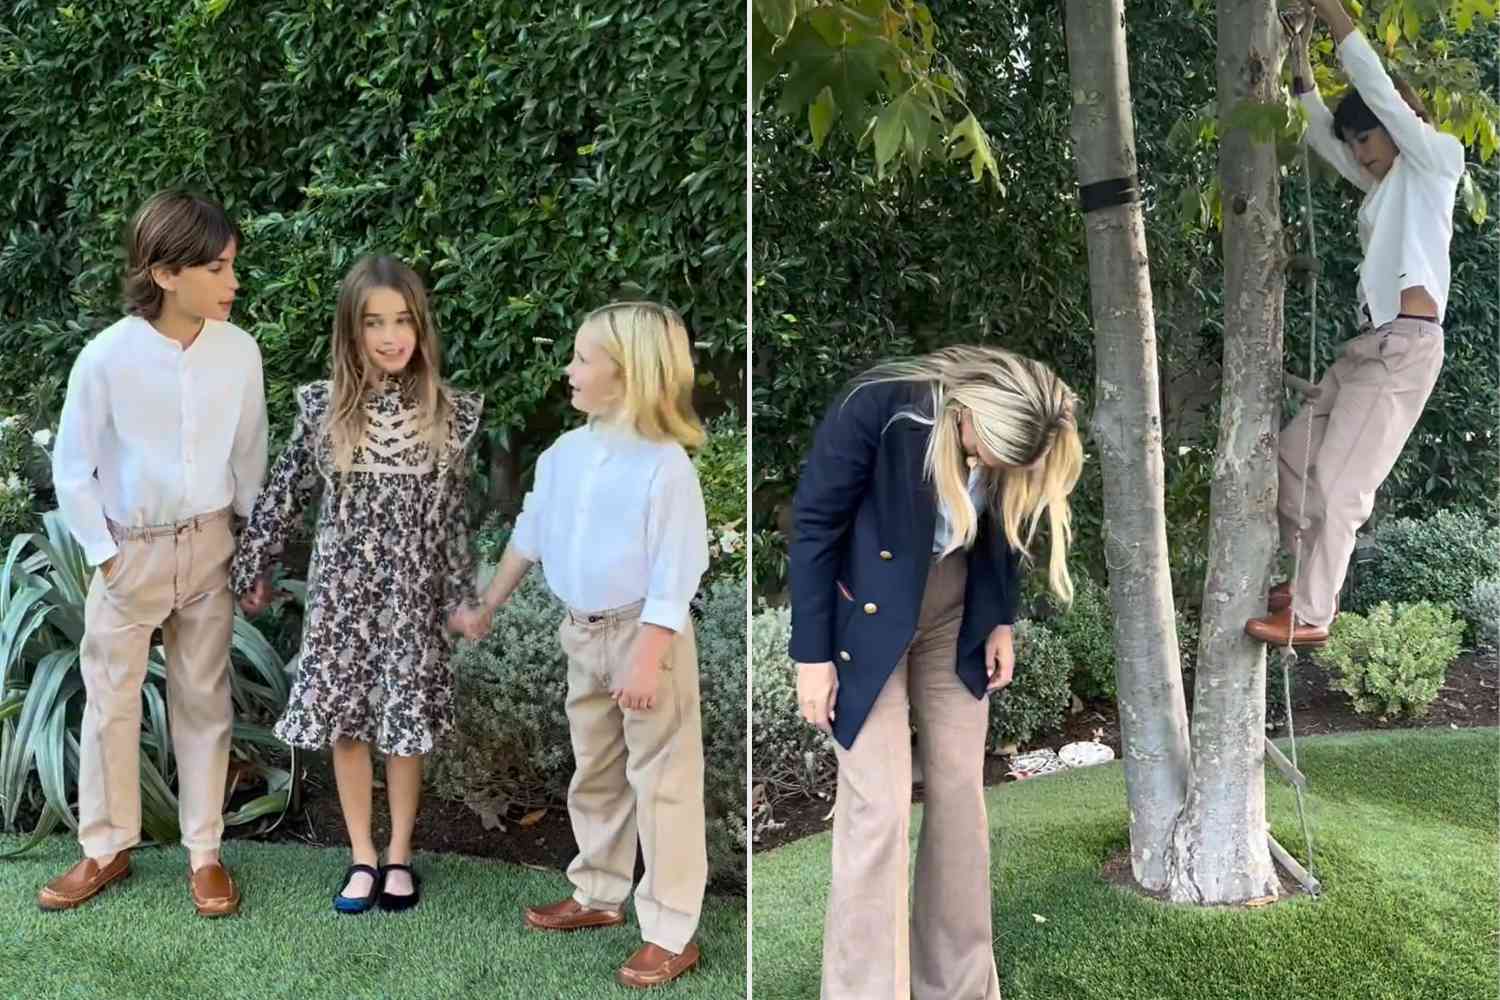 Molly Sims Shares Hilarious Look at What It Took to Get Family Holiday Photo with Her Three Kids